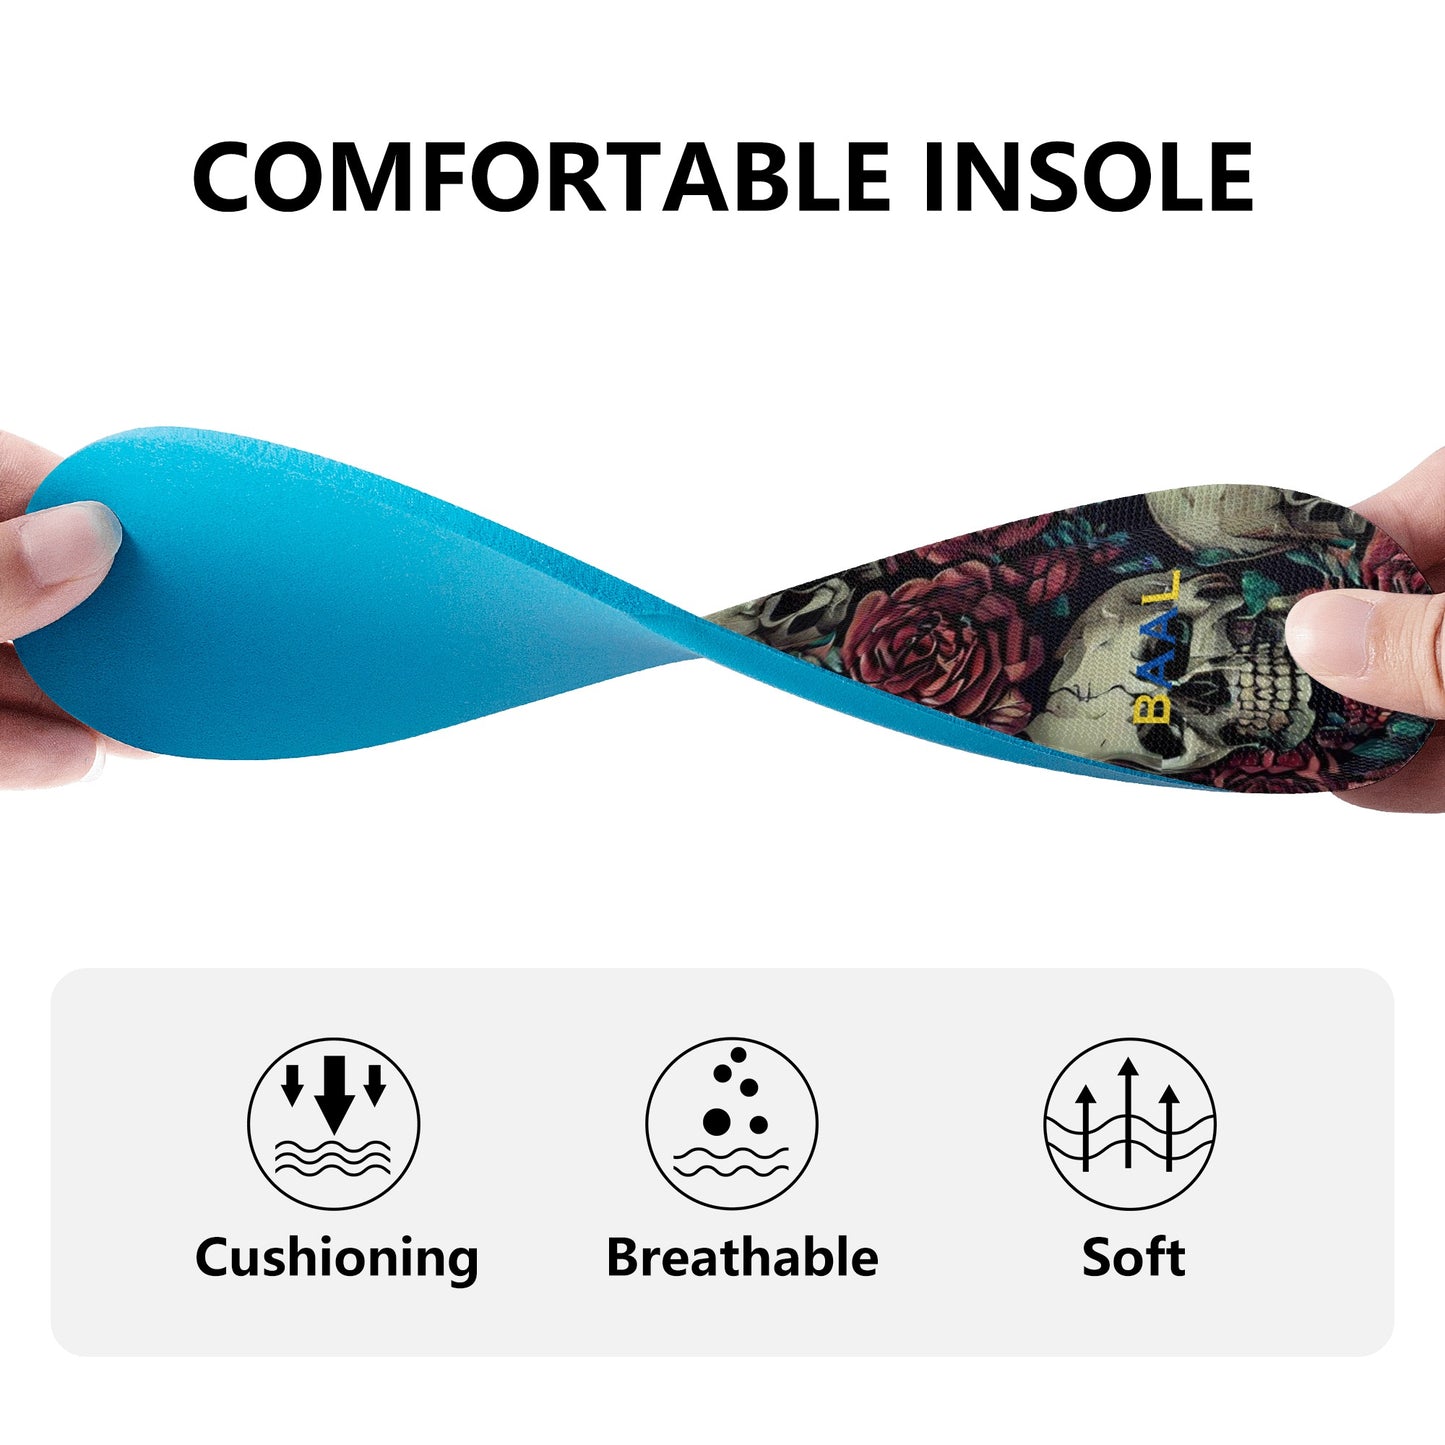 Comfortable Insole: Padded Insole for Year-Round Comfort